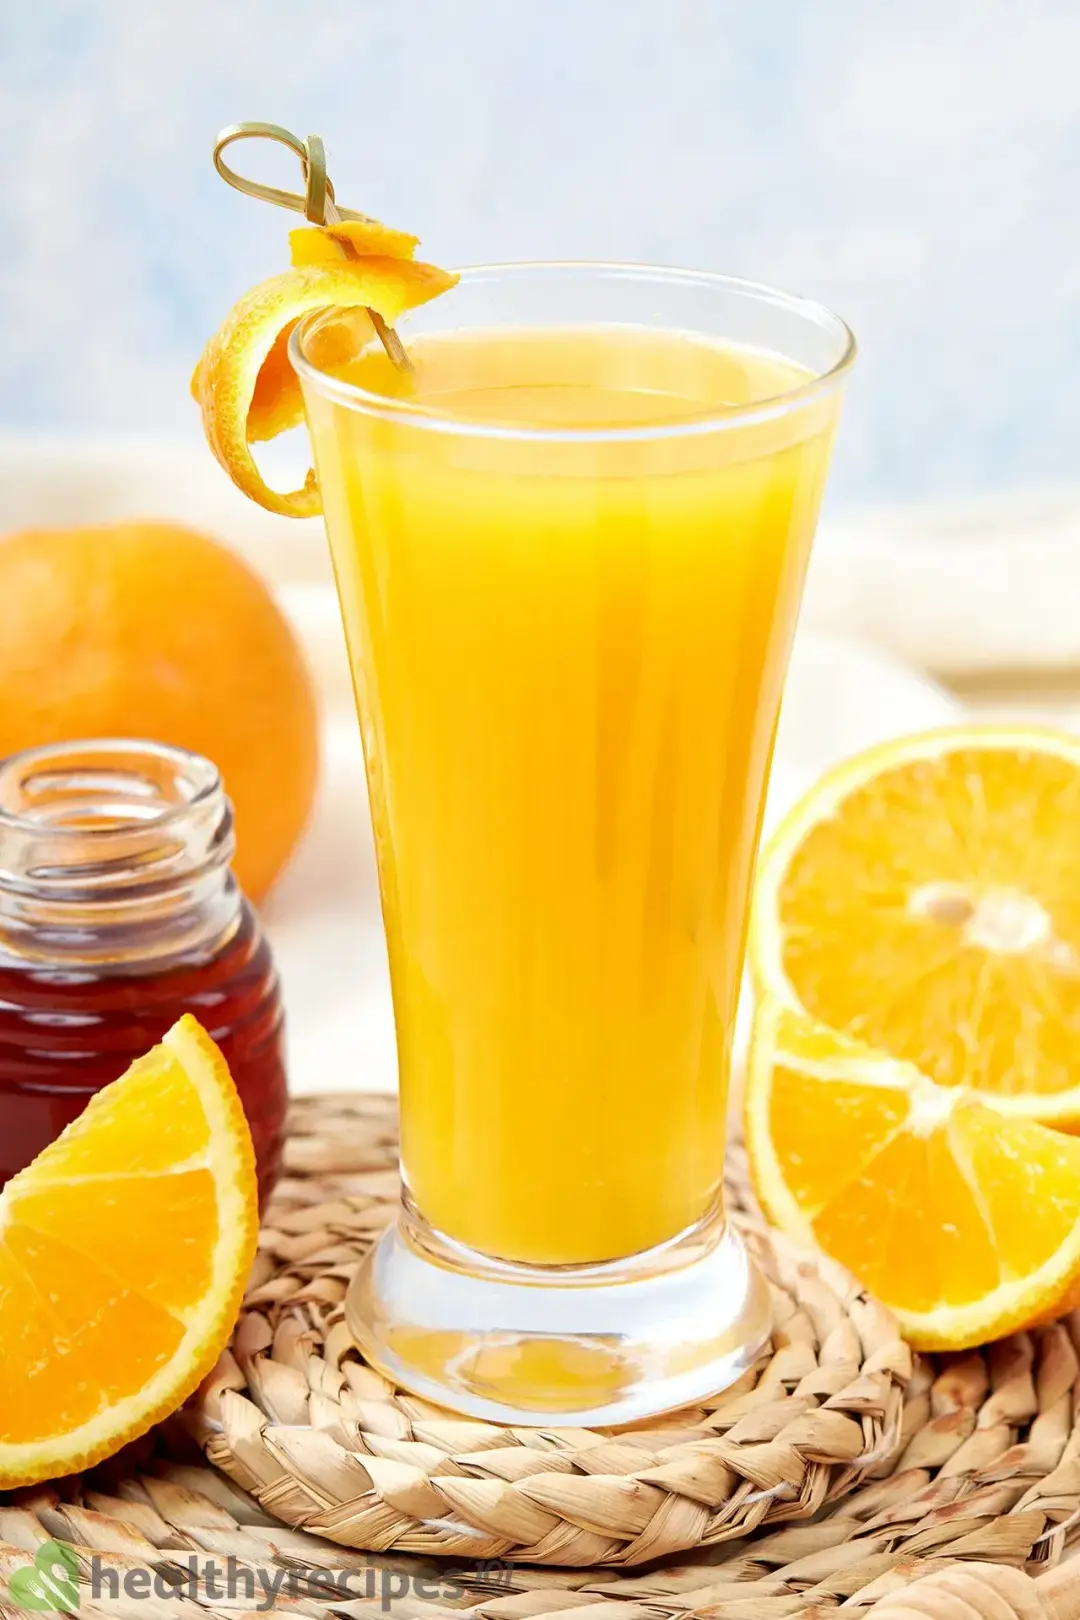 A tall glass filled with orange juice, next to some orange wedges and a jar of honey